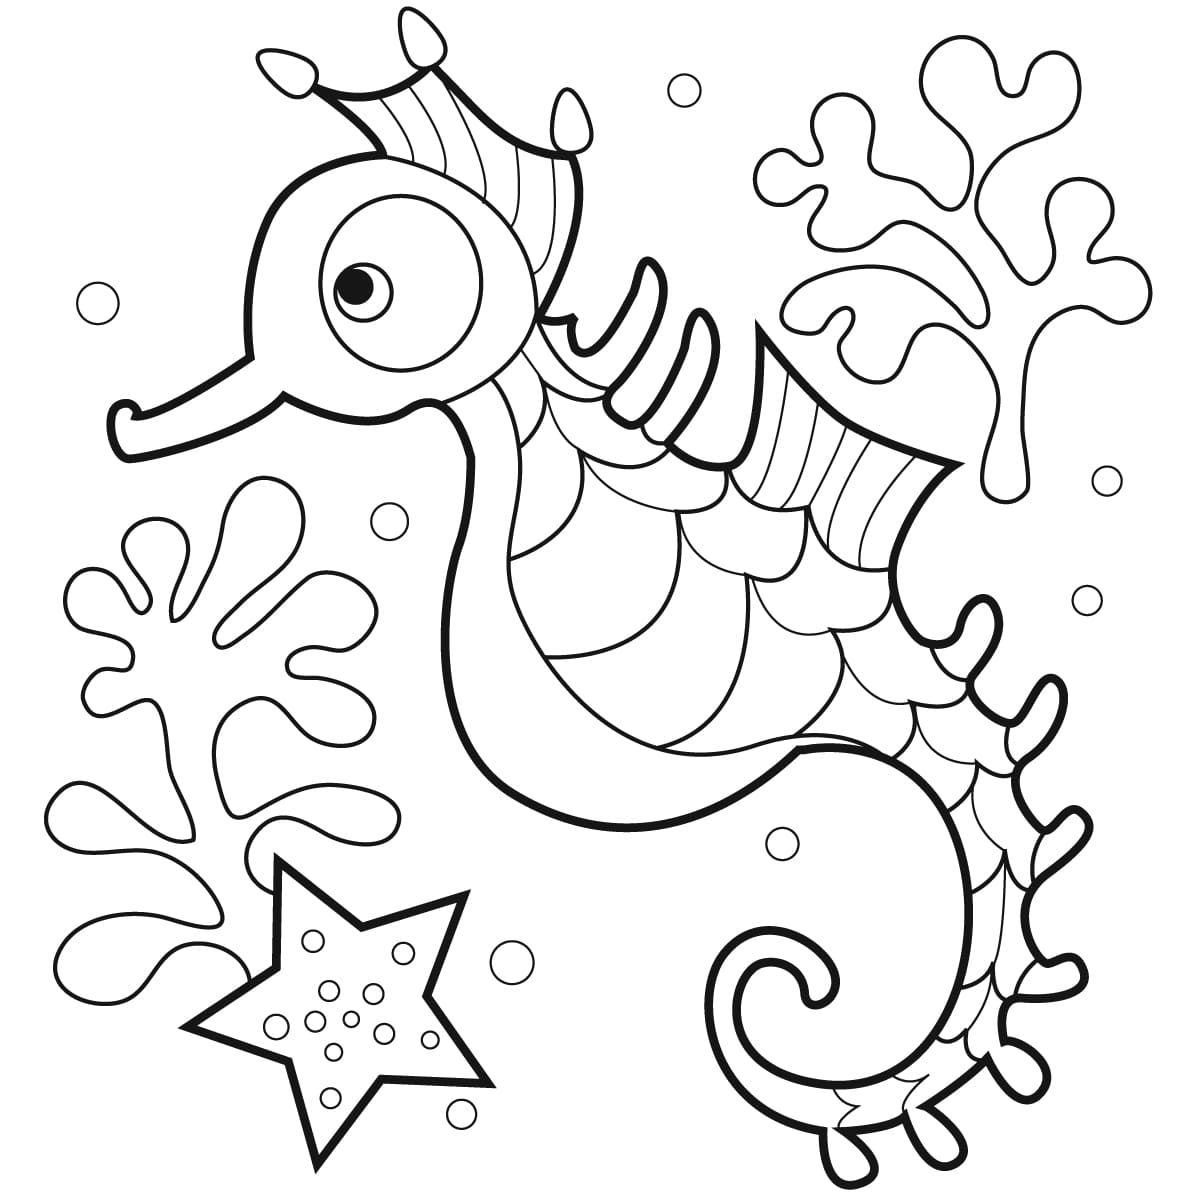 Seahorse For Children Image Coloring Page